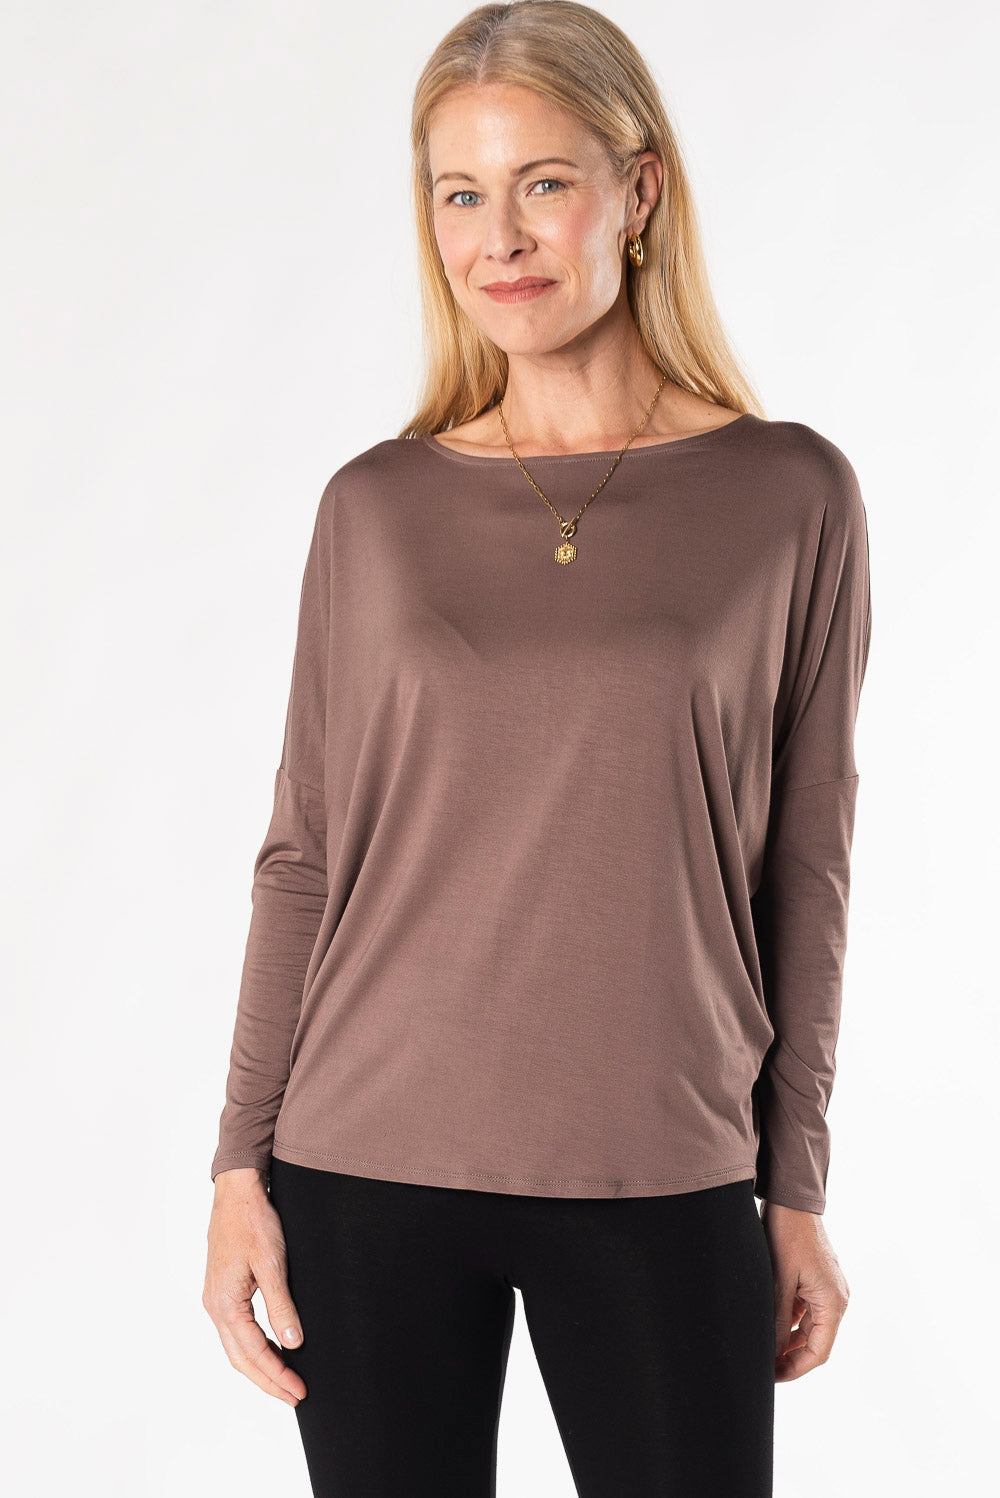 Buy Brown Tops for Women by Brucella Online